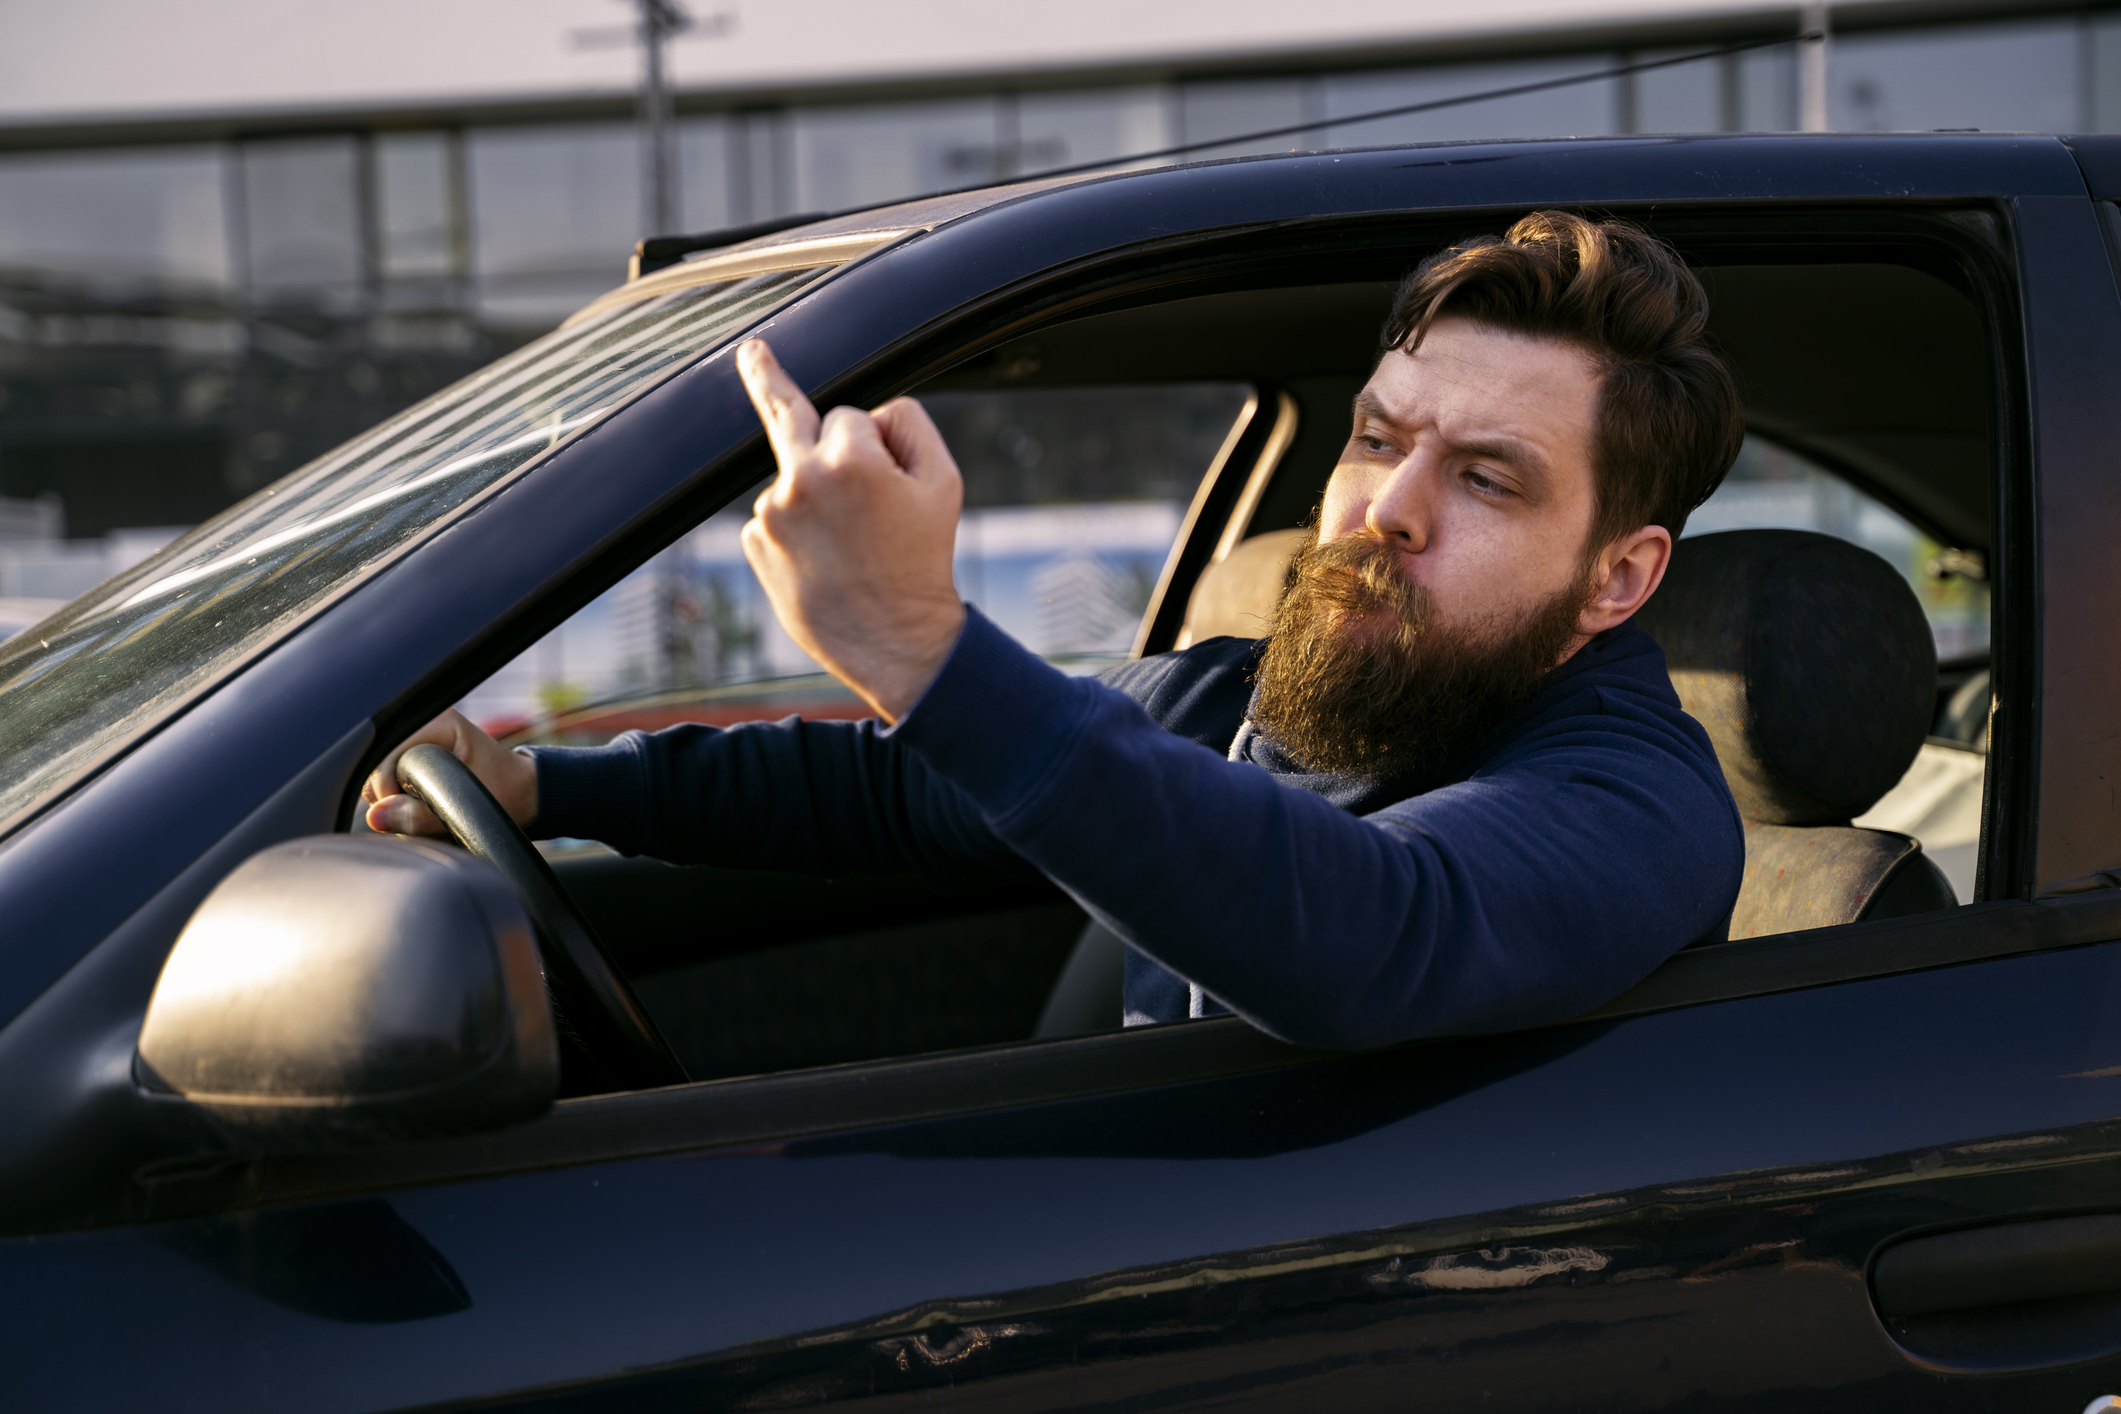 Man in vehicle making a dismissive gesture with hand